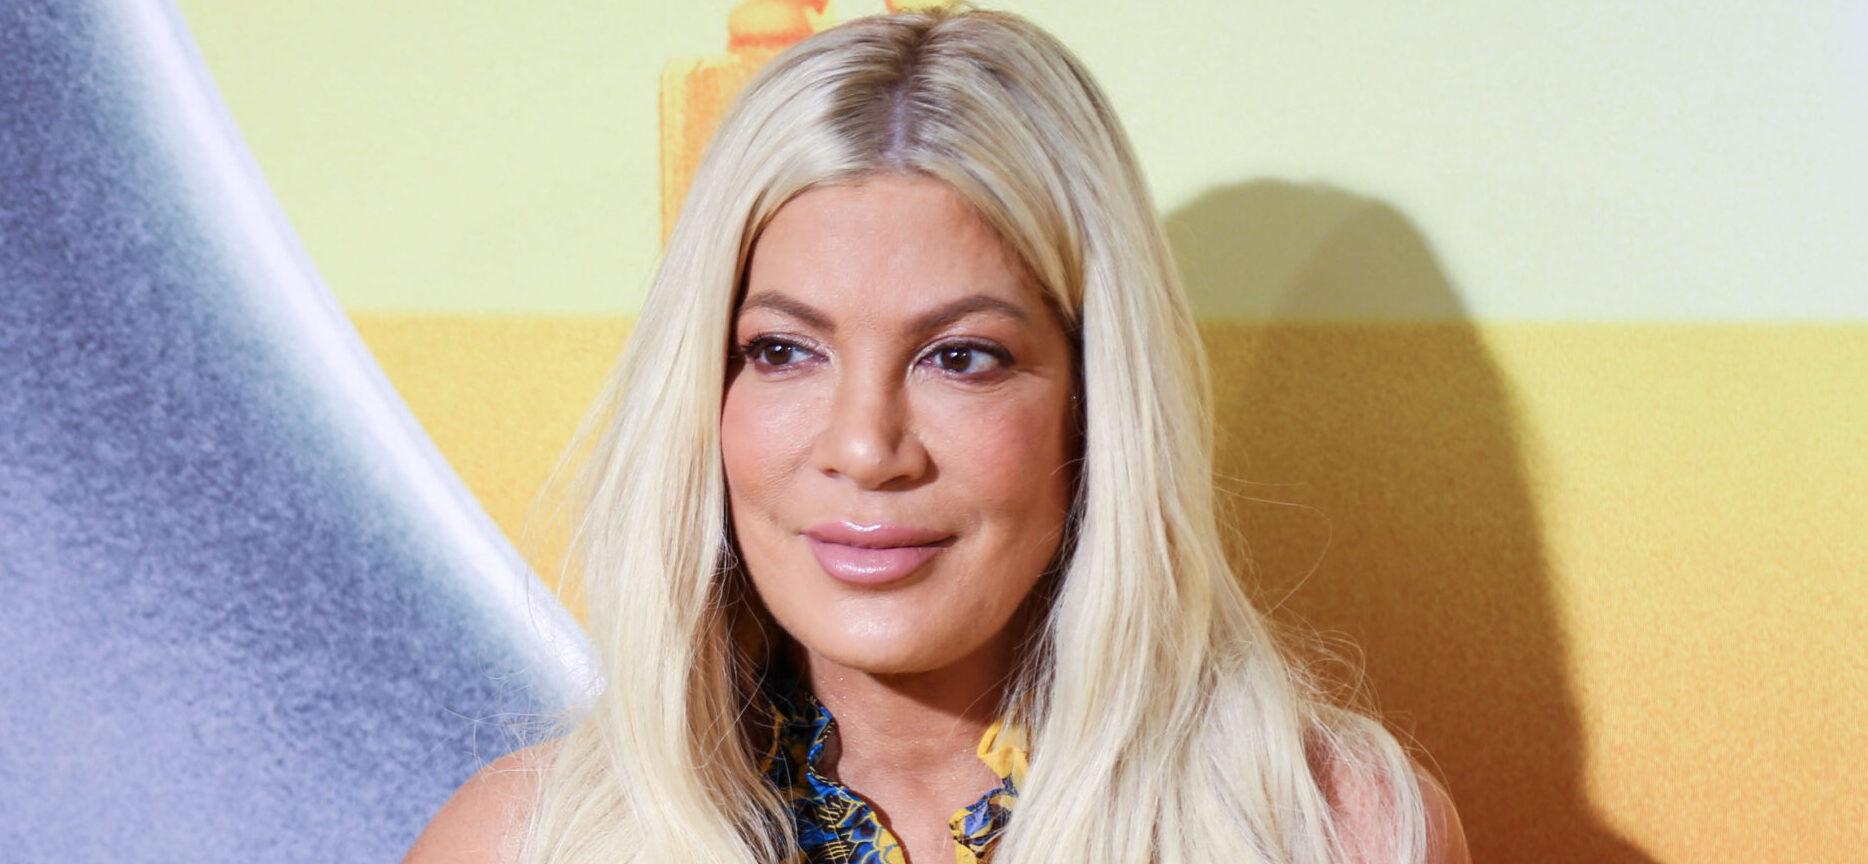 Tori Spelling Expresses Nervousness As Son Liam Goes In For Surgery